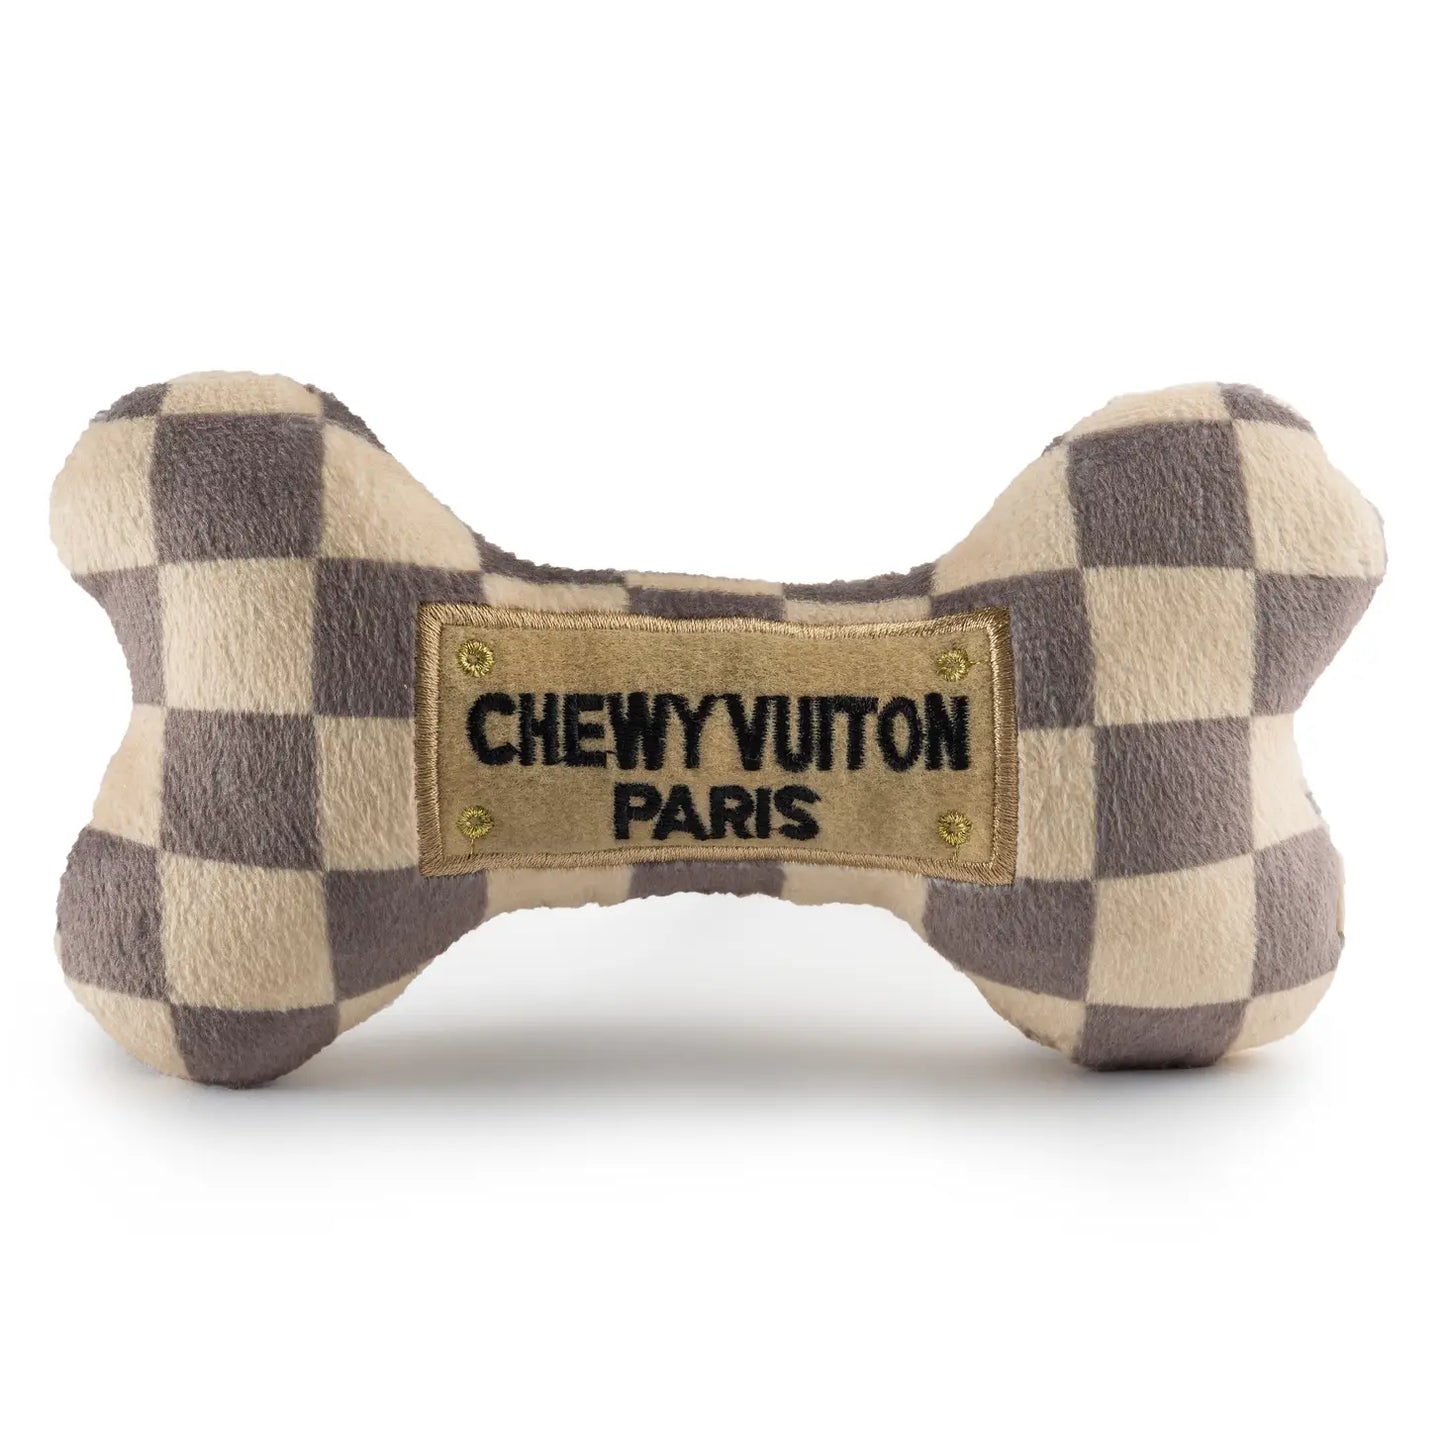 Chewy Vuiton Dog Toy